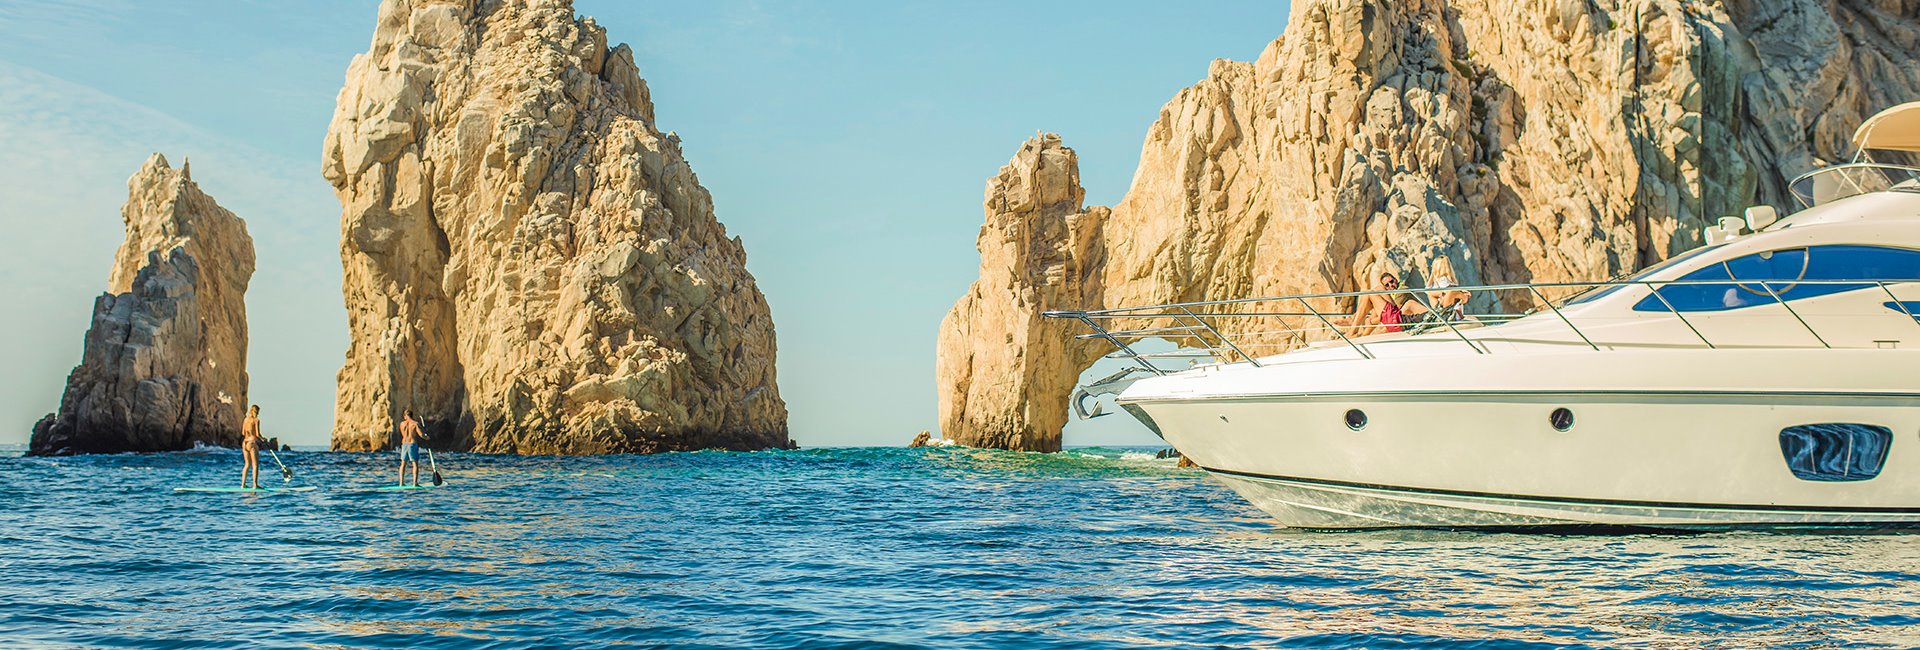  Yatch package at Grand Velas Los Cabos, Mexico